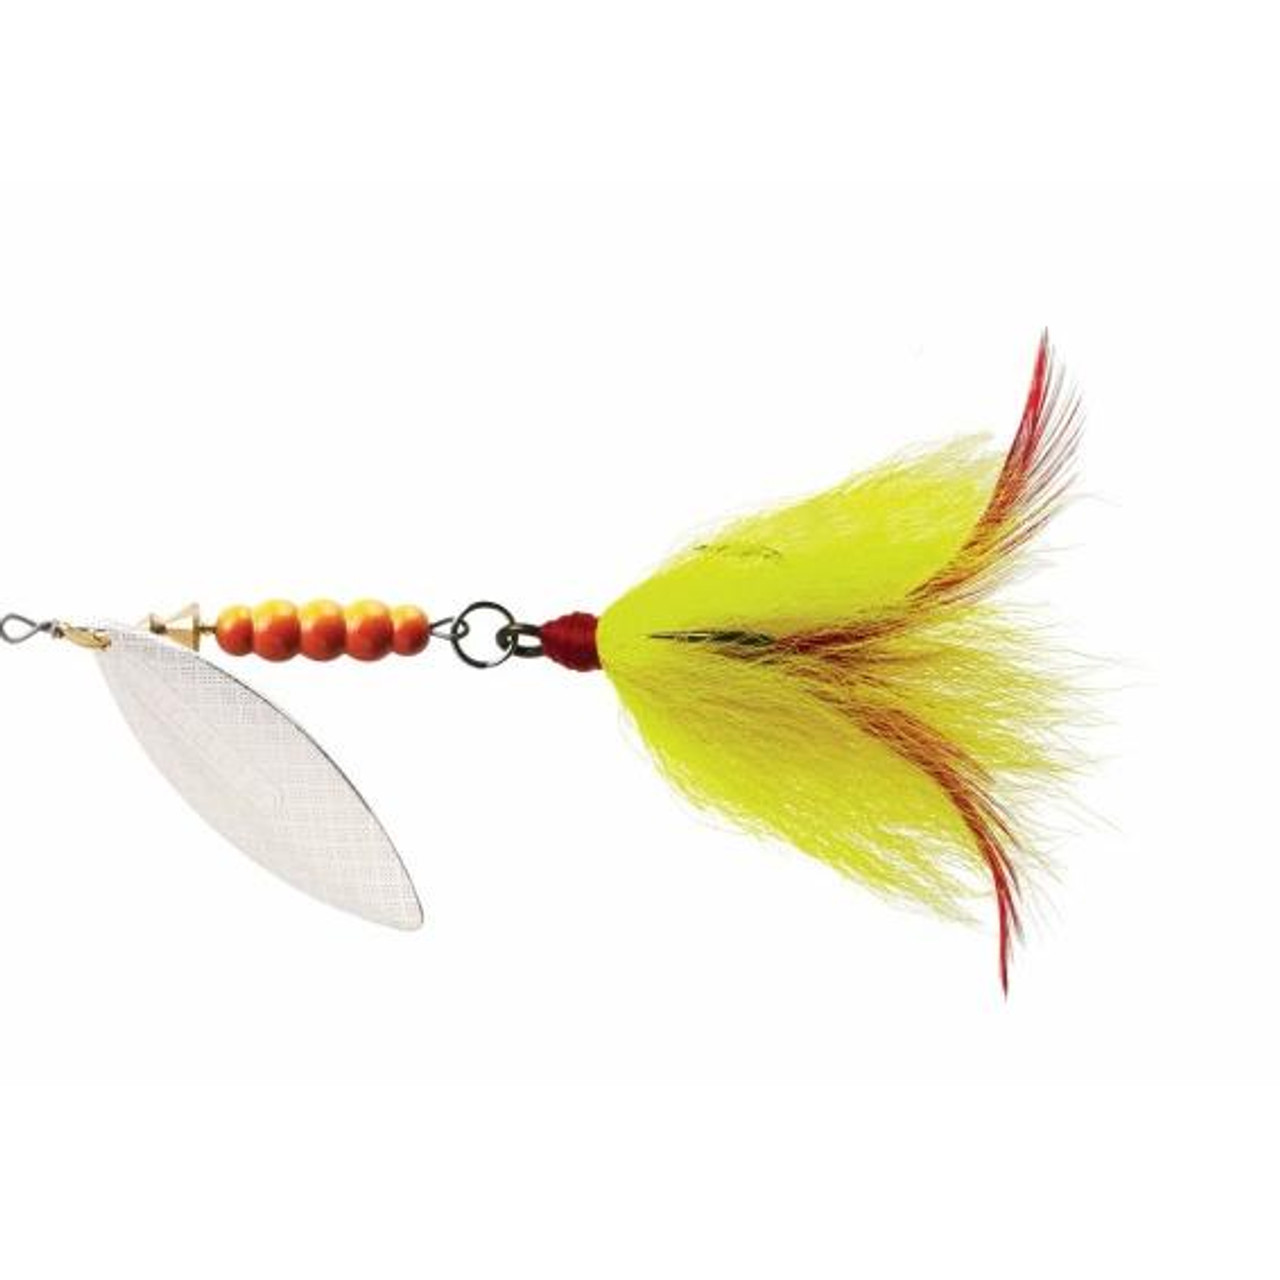 https://cdn11.bigcommerce.com/s-70mih4s/images/stencil/1280x1280/products/5892/65283/Mepps-Giant-Killer-Dressed-Bucktail-022141553122_image1__61547.1711567026.jpg?c=2